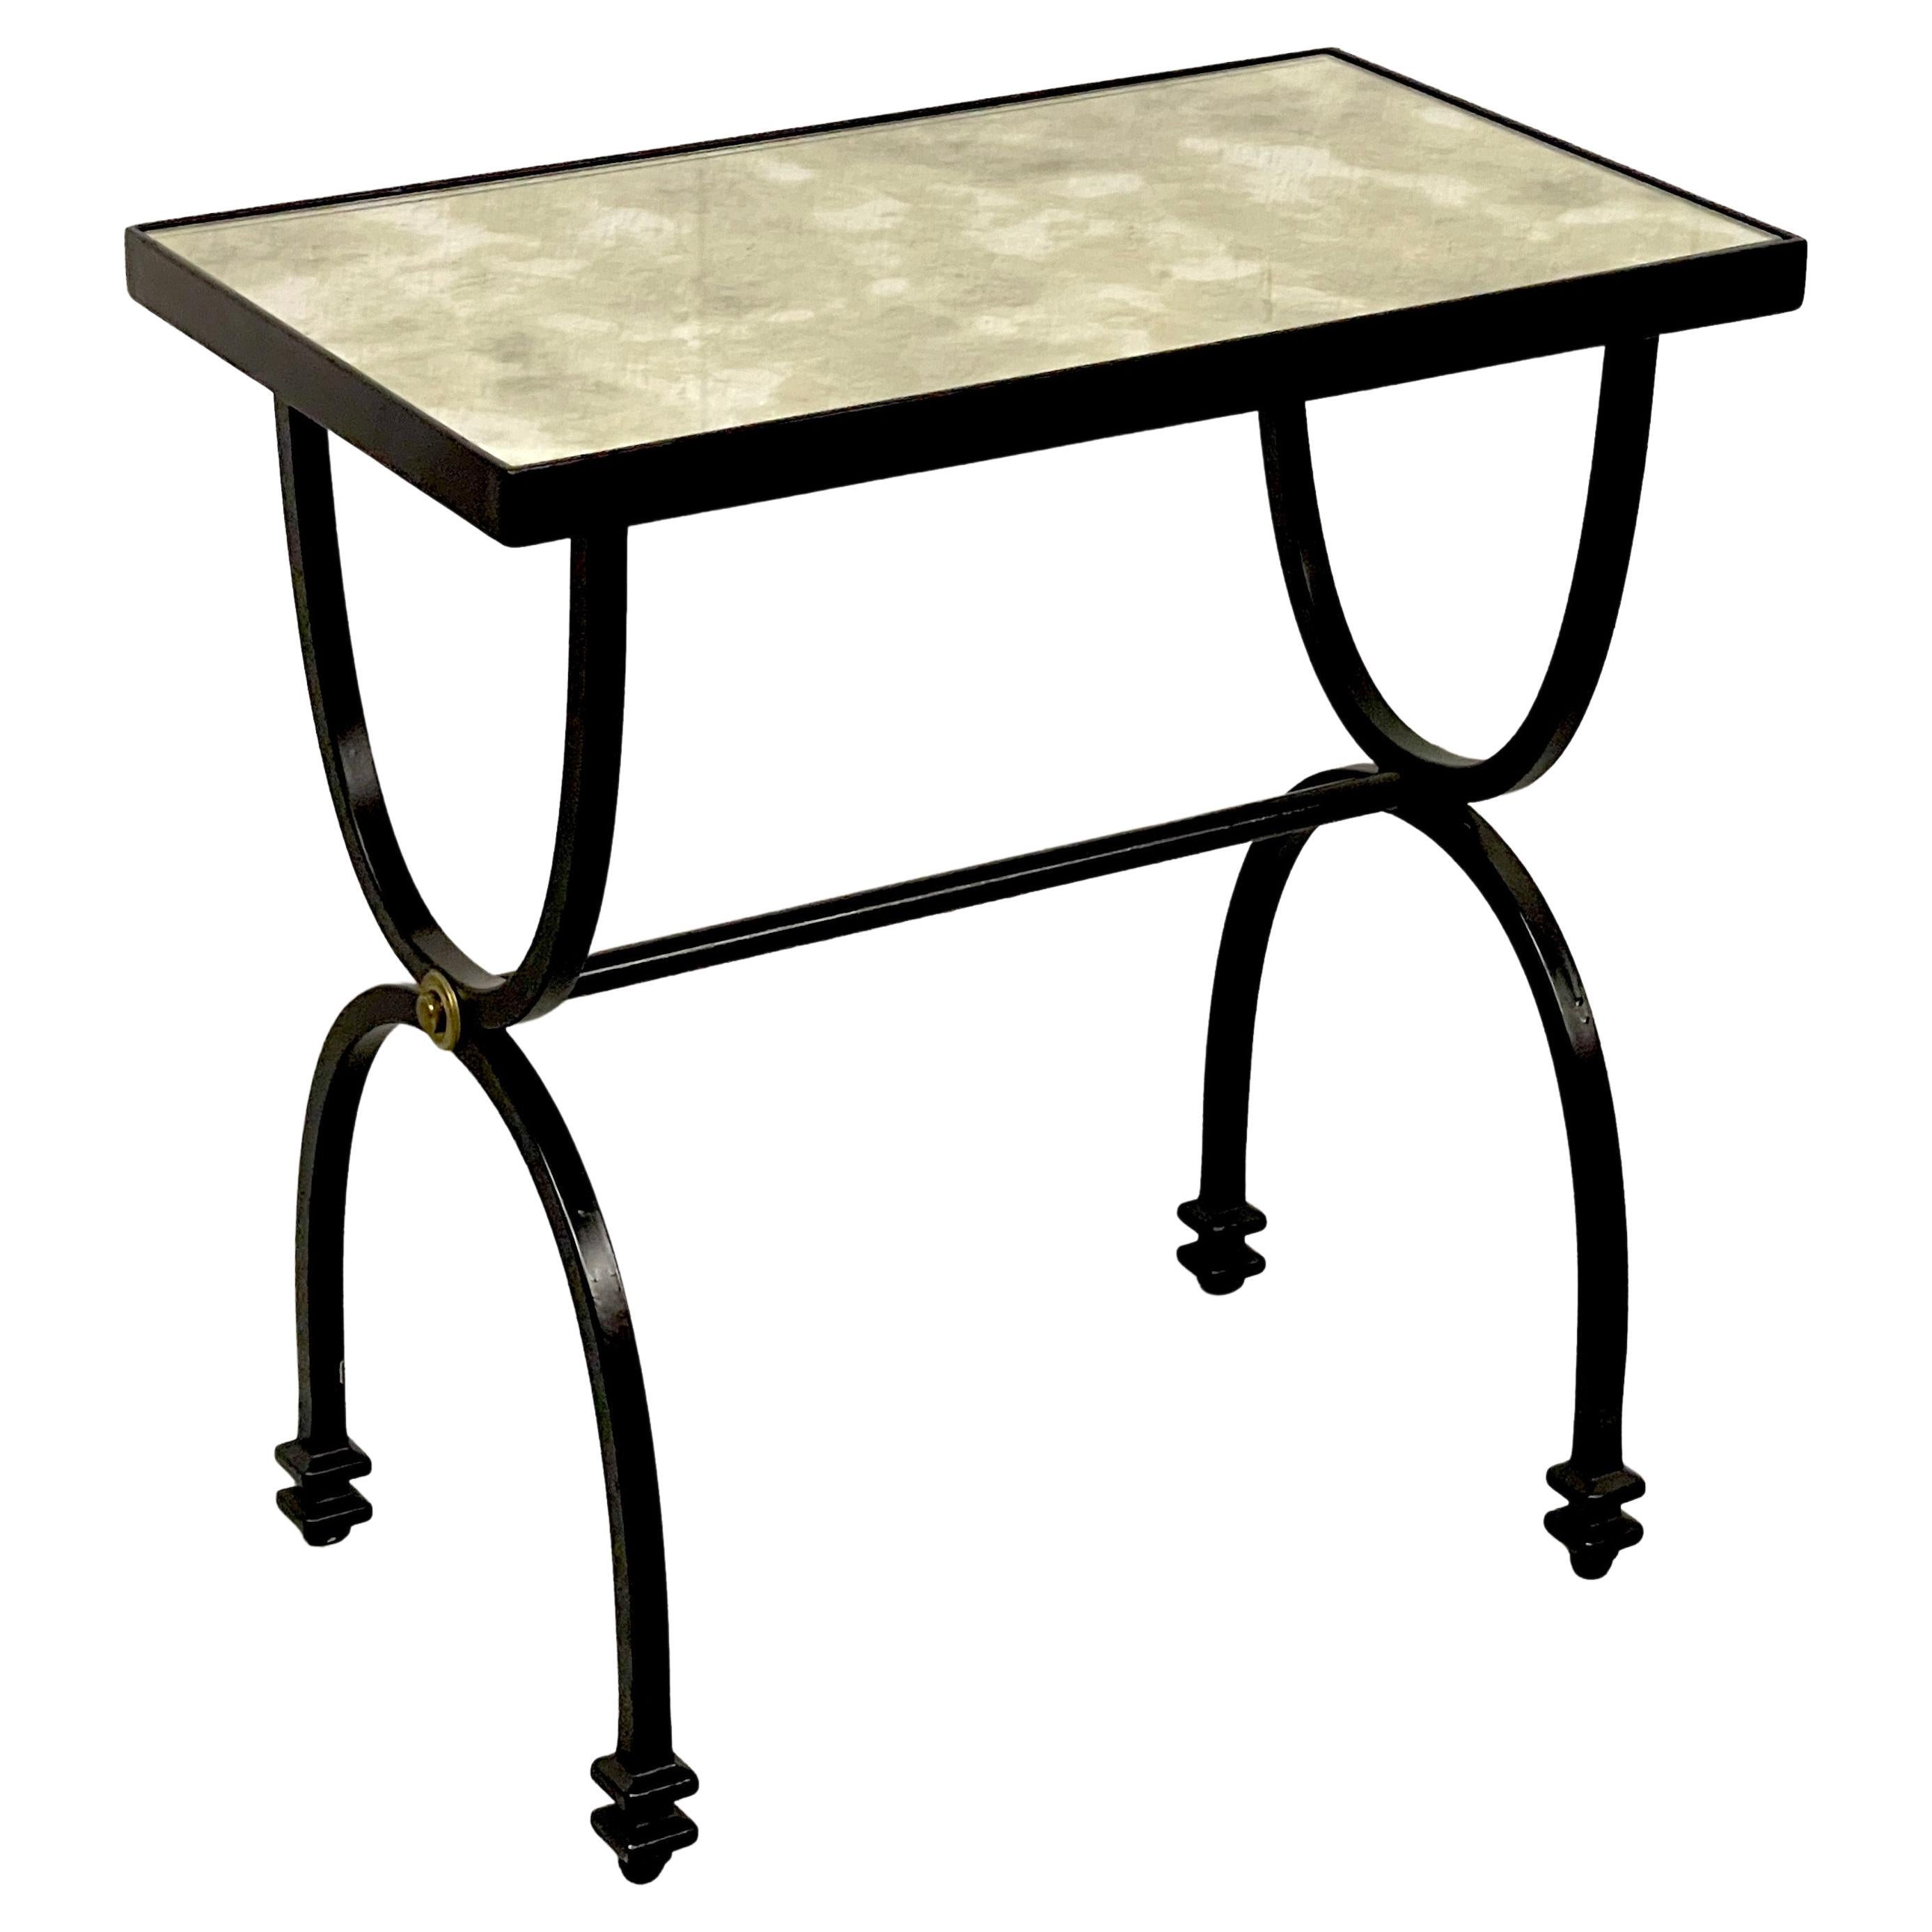 Diminutive French Modern Style Side Table, Style of Maison Jansen